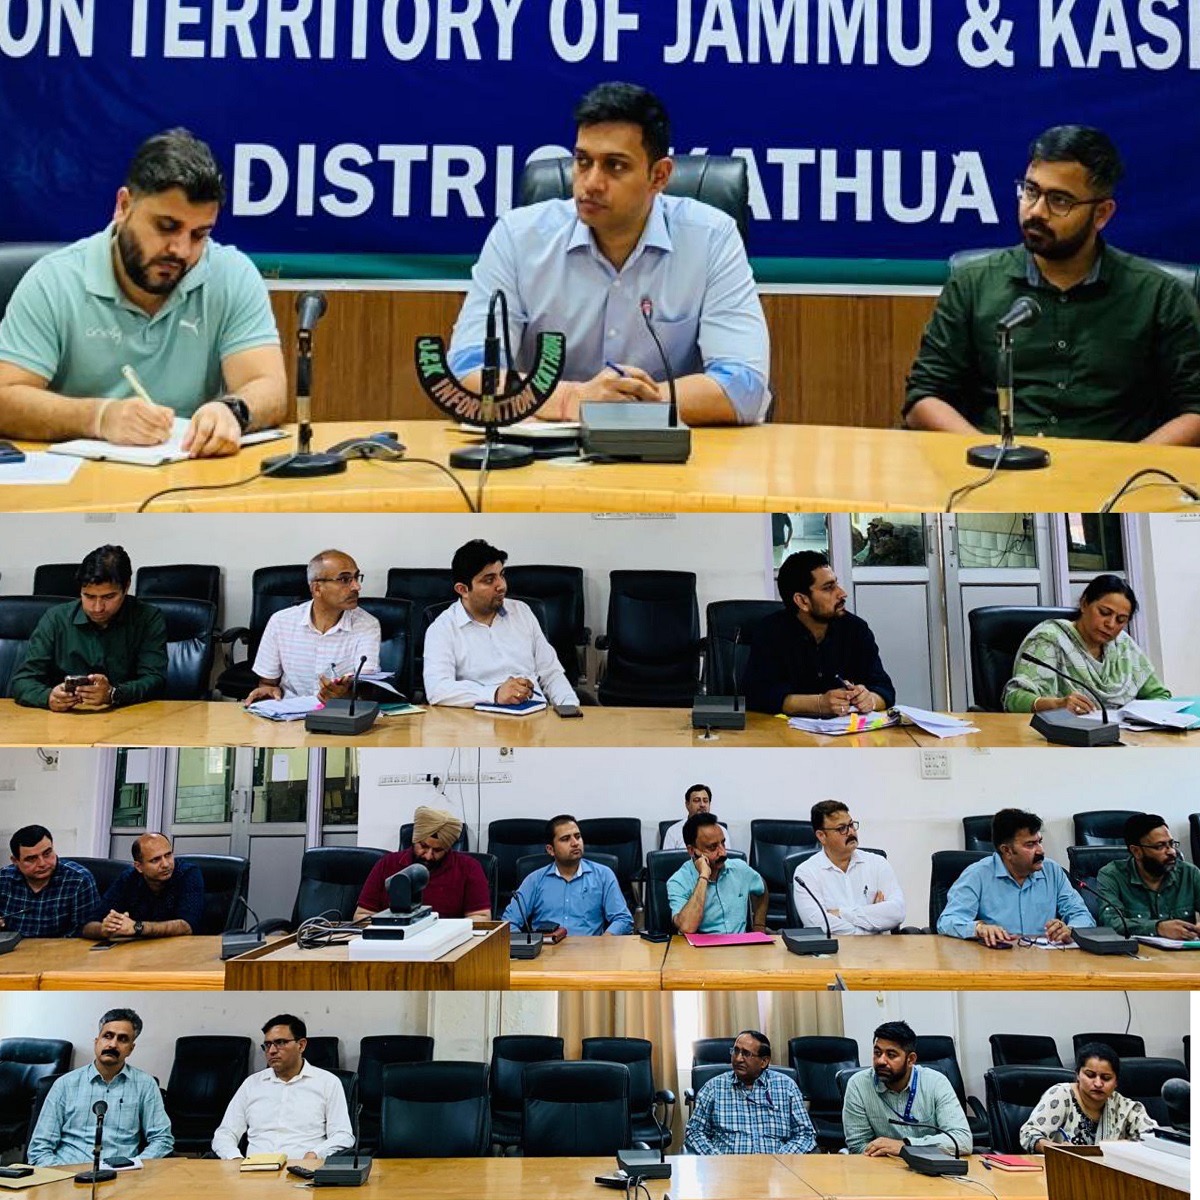 DC Kathua issues directions over HADP